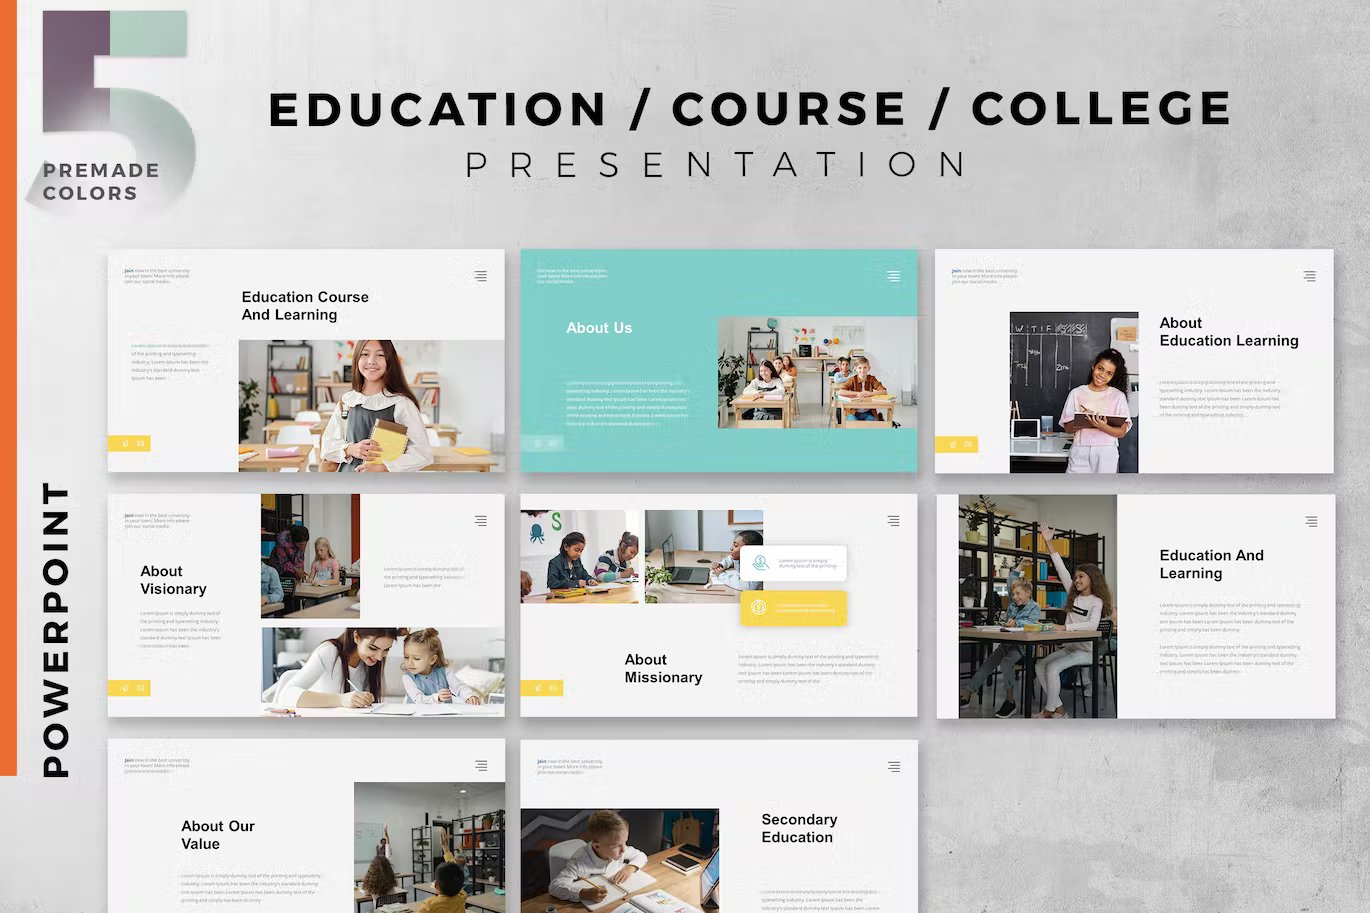 A set of 8 different education college presentation templates in white, black, light blue and yellow on a gray background.